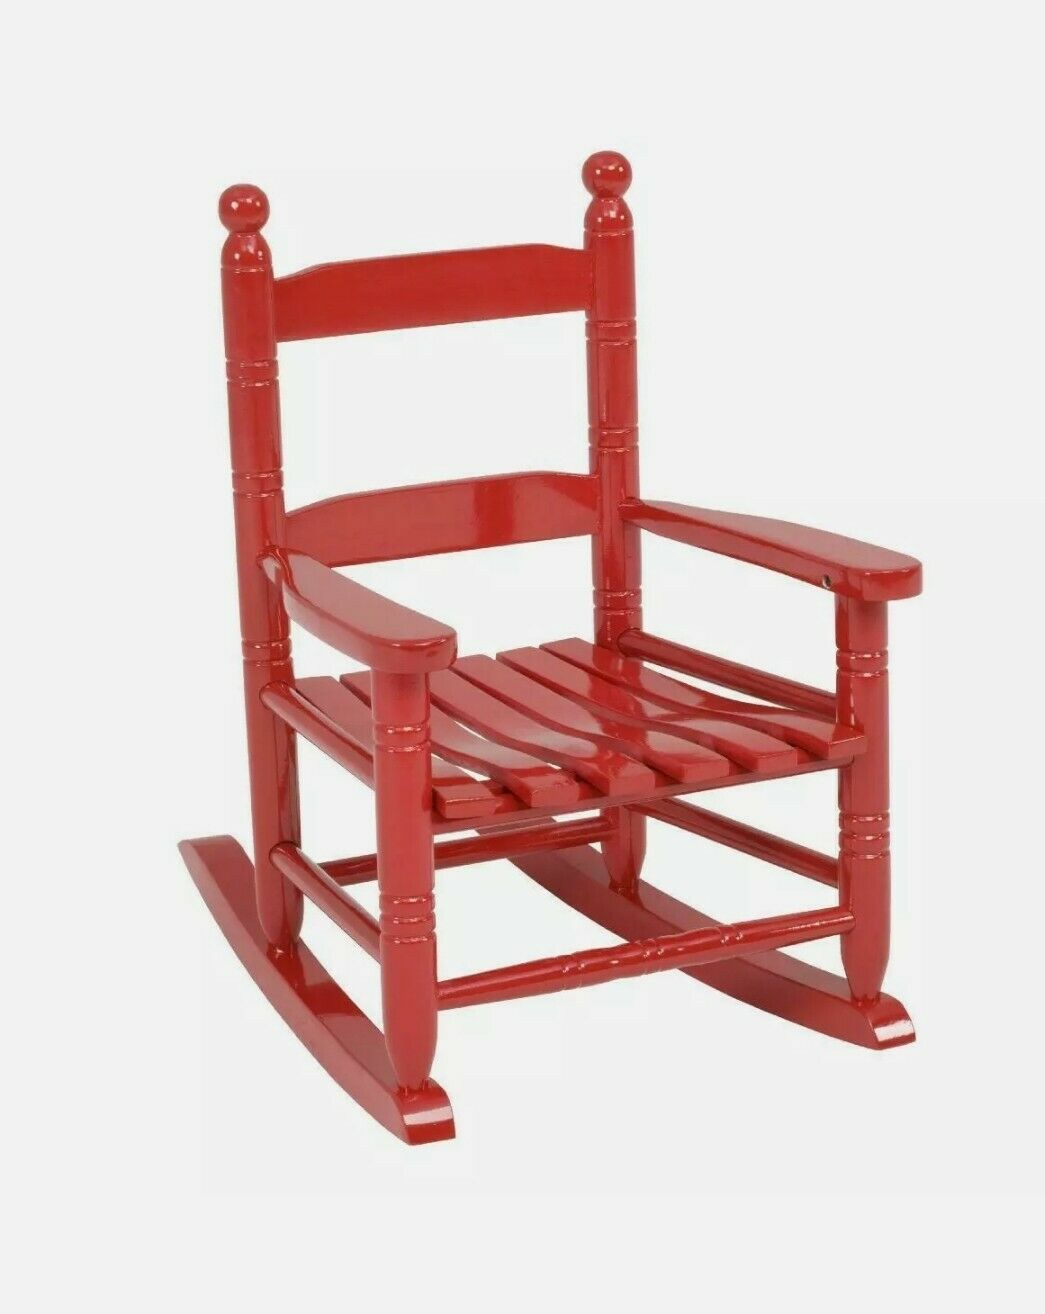 Red Child's Porch Rocker Kids Rocking Chair Kn-10r Jack Post Corp 22.5" Holiday